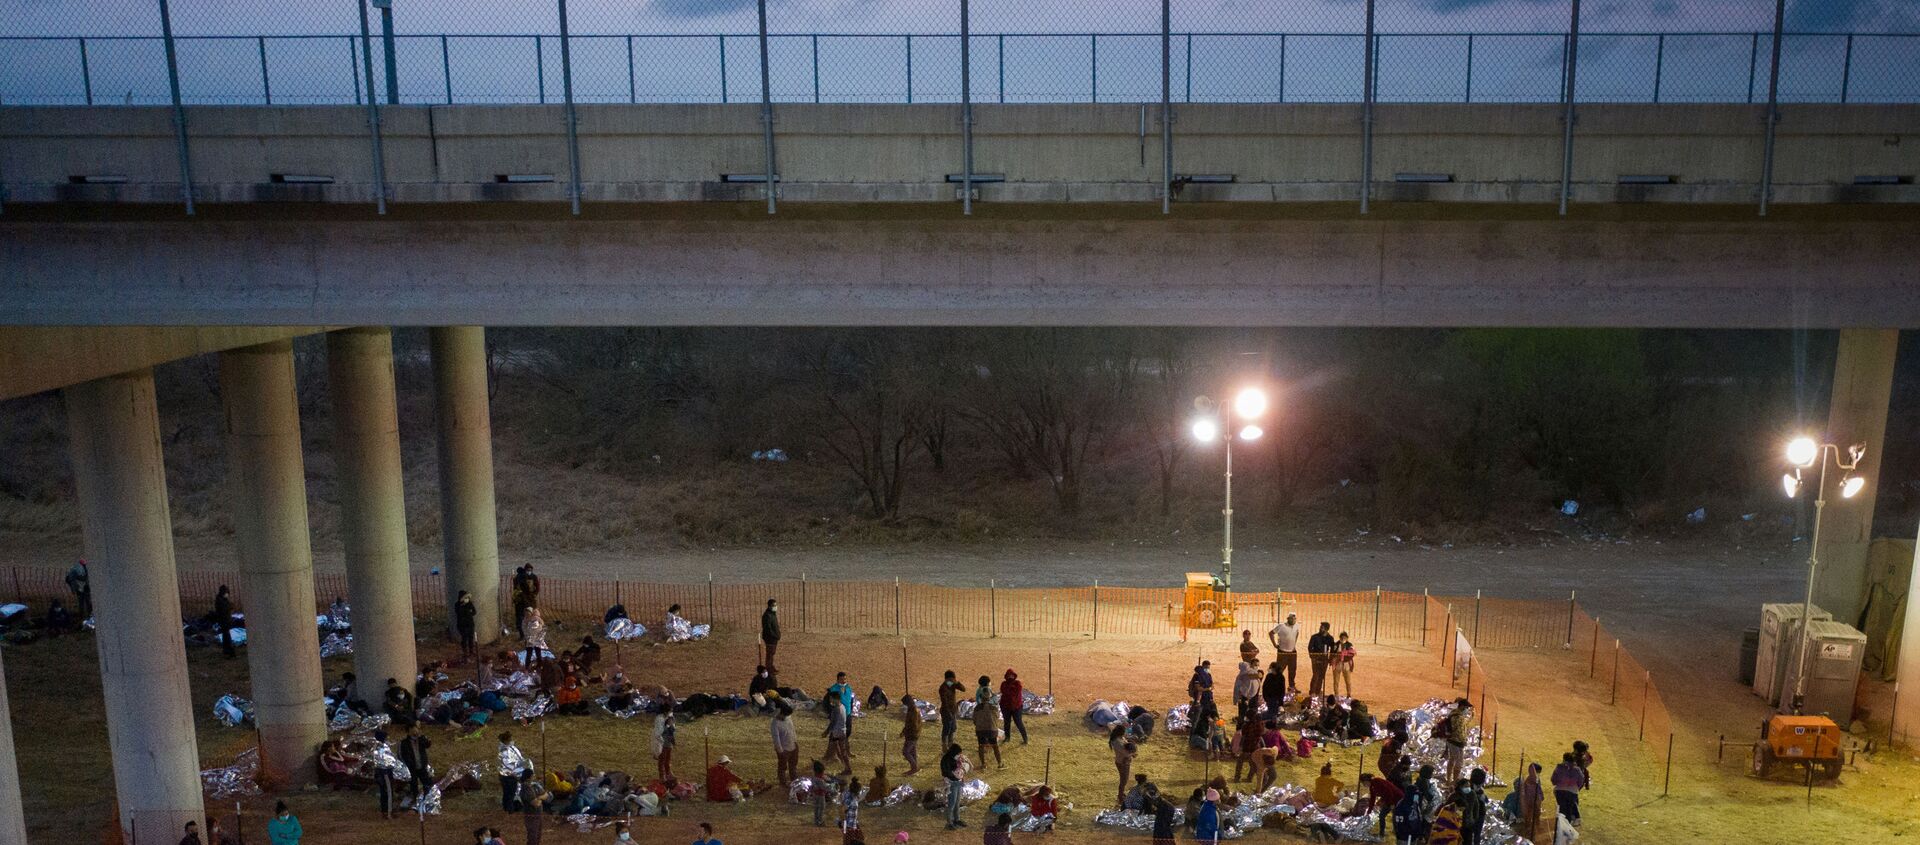 Asylum seeking migrant families and unaccompanied minors from Central America take refuge in a makeshift US Customs and Border Protection processing centre under the Anzalduas International Bridge after crossing the Rio Grande river into the United States from Mexico in Granjeno, Texas, 12 March 2021. REUTERS/Adrees Latif/File Photo - Sputnik International, 1920, 20.03.2021